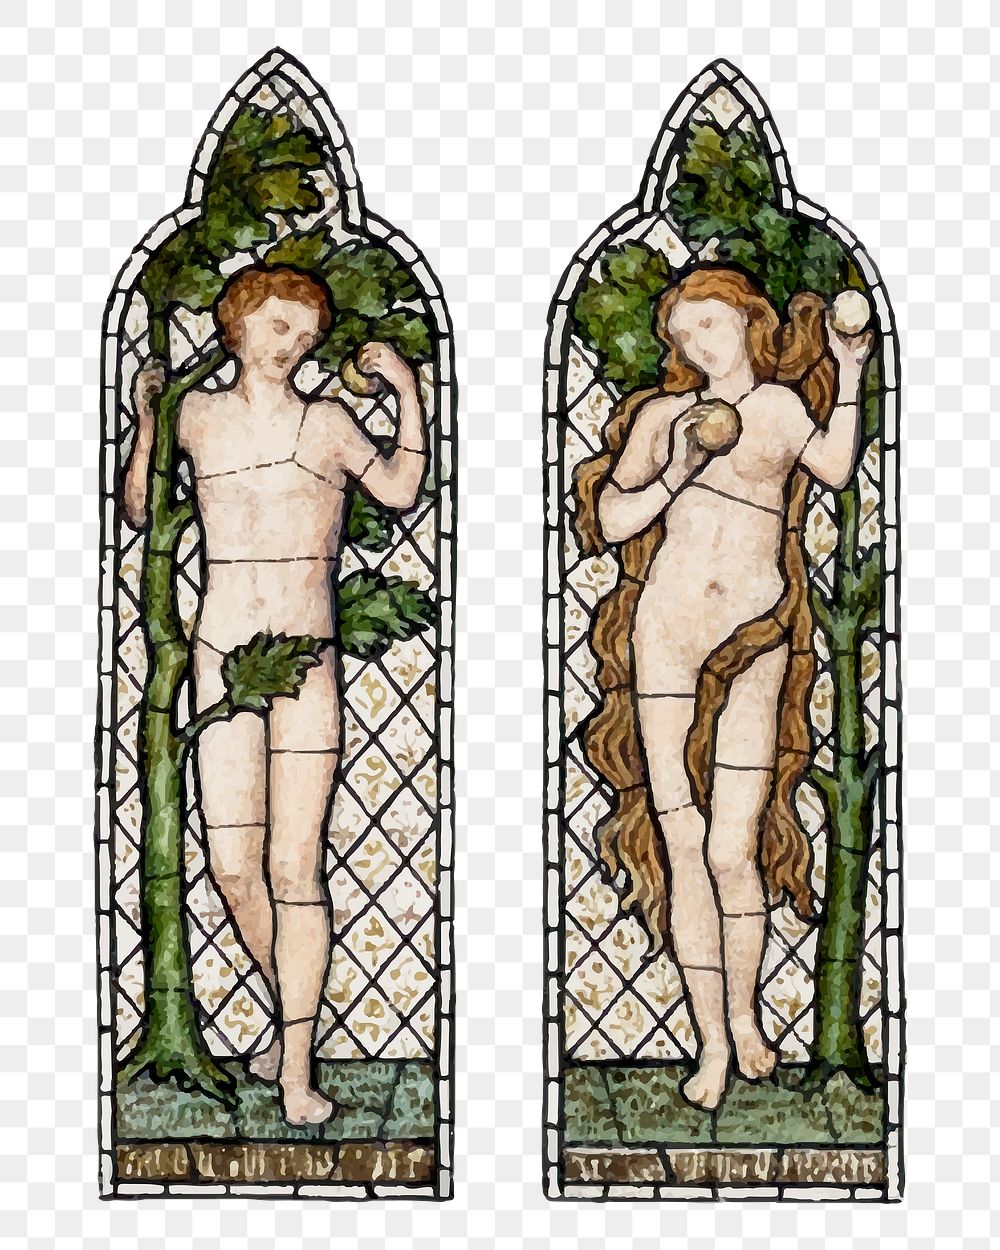 PNG vintage Adam and Eve sticker, remixed from artworks by Sir Edward Coley Burne&ndash;Jones